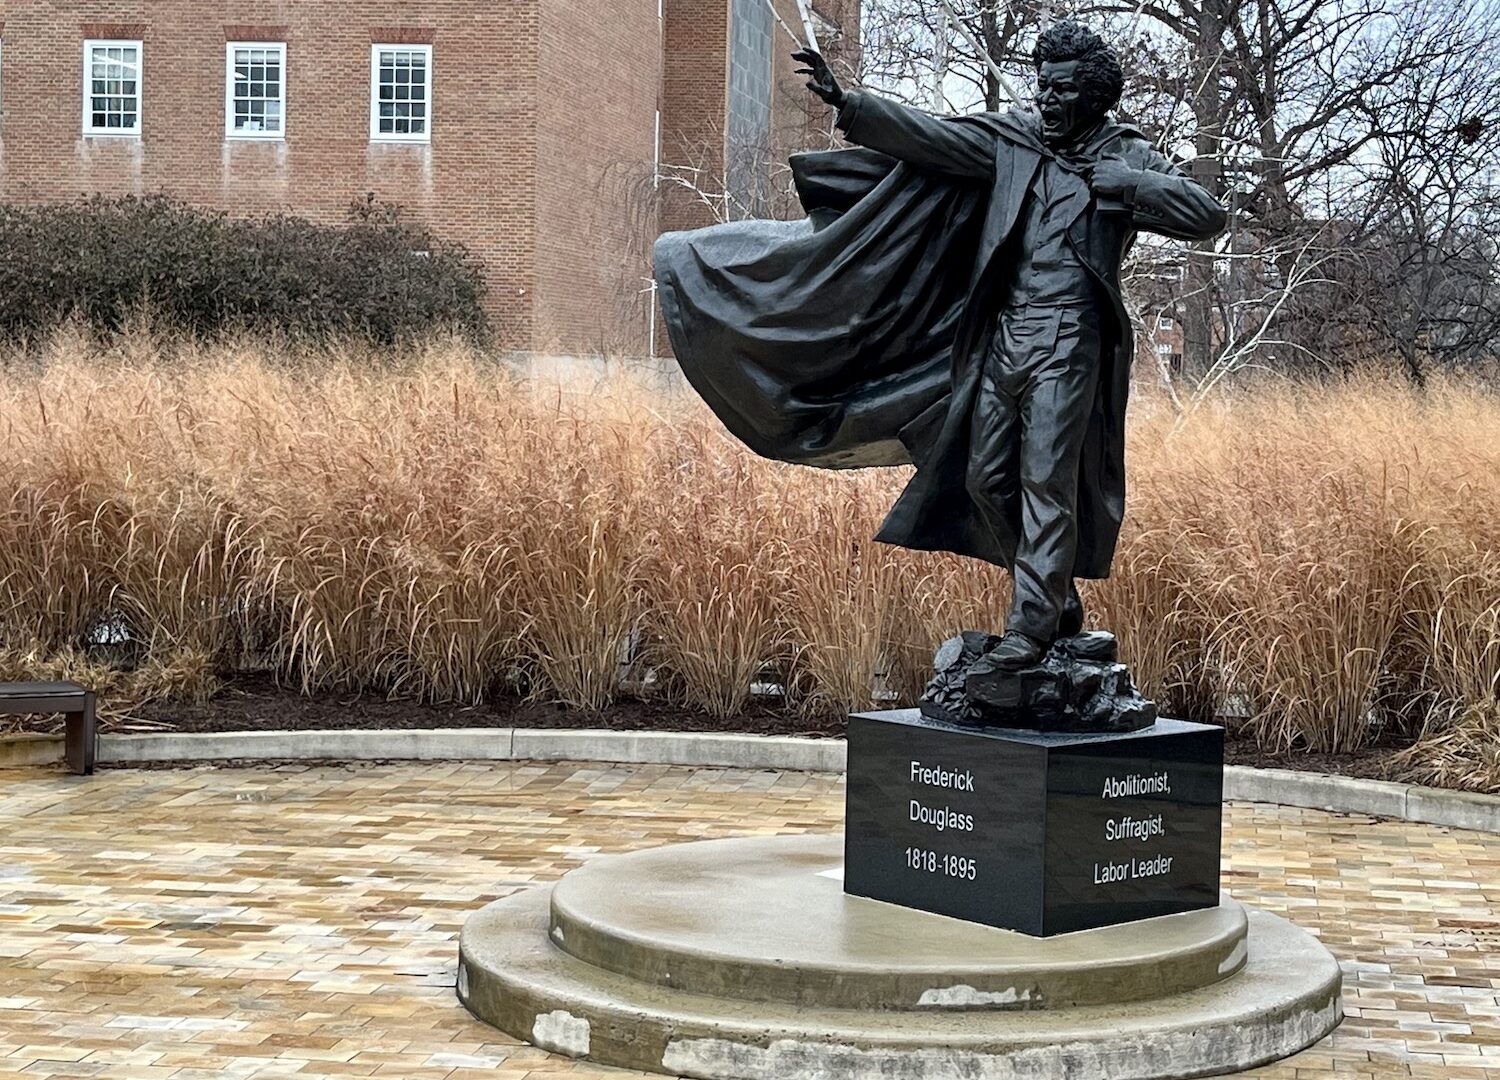 The Frederick Douglas statue on the University of Maryland campus depicts, as wikipedia puts it, "Douglass in the middle of a speech, with one arm outstretched, and a copy of his autobiography under the other arm." His mouth is open in a fiery speech. The statue is cast bronze on a black marble block with white text chiseled on front reading Frederick Douglas 1818-1895, on the side, white text is legible that reads: Abolitionist, Suffragist, Labor Leader. The figure is set off to the right of the image with a band of long, wheat colored grasses in the middle background, with three windows of the red brick colonial style building in the distant background.